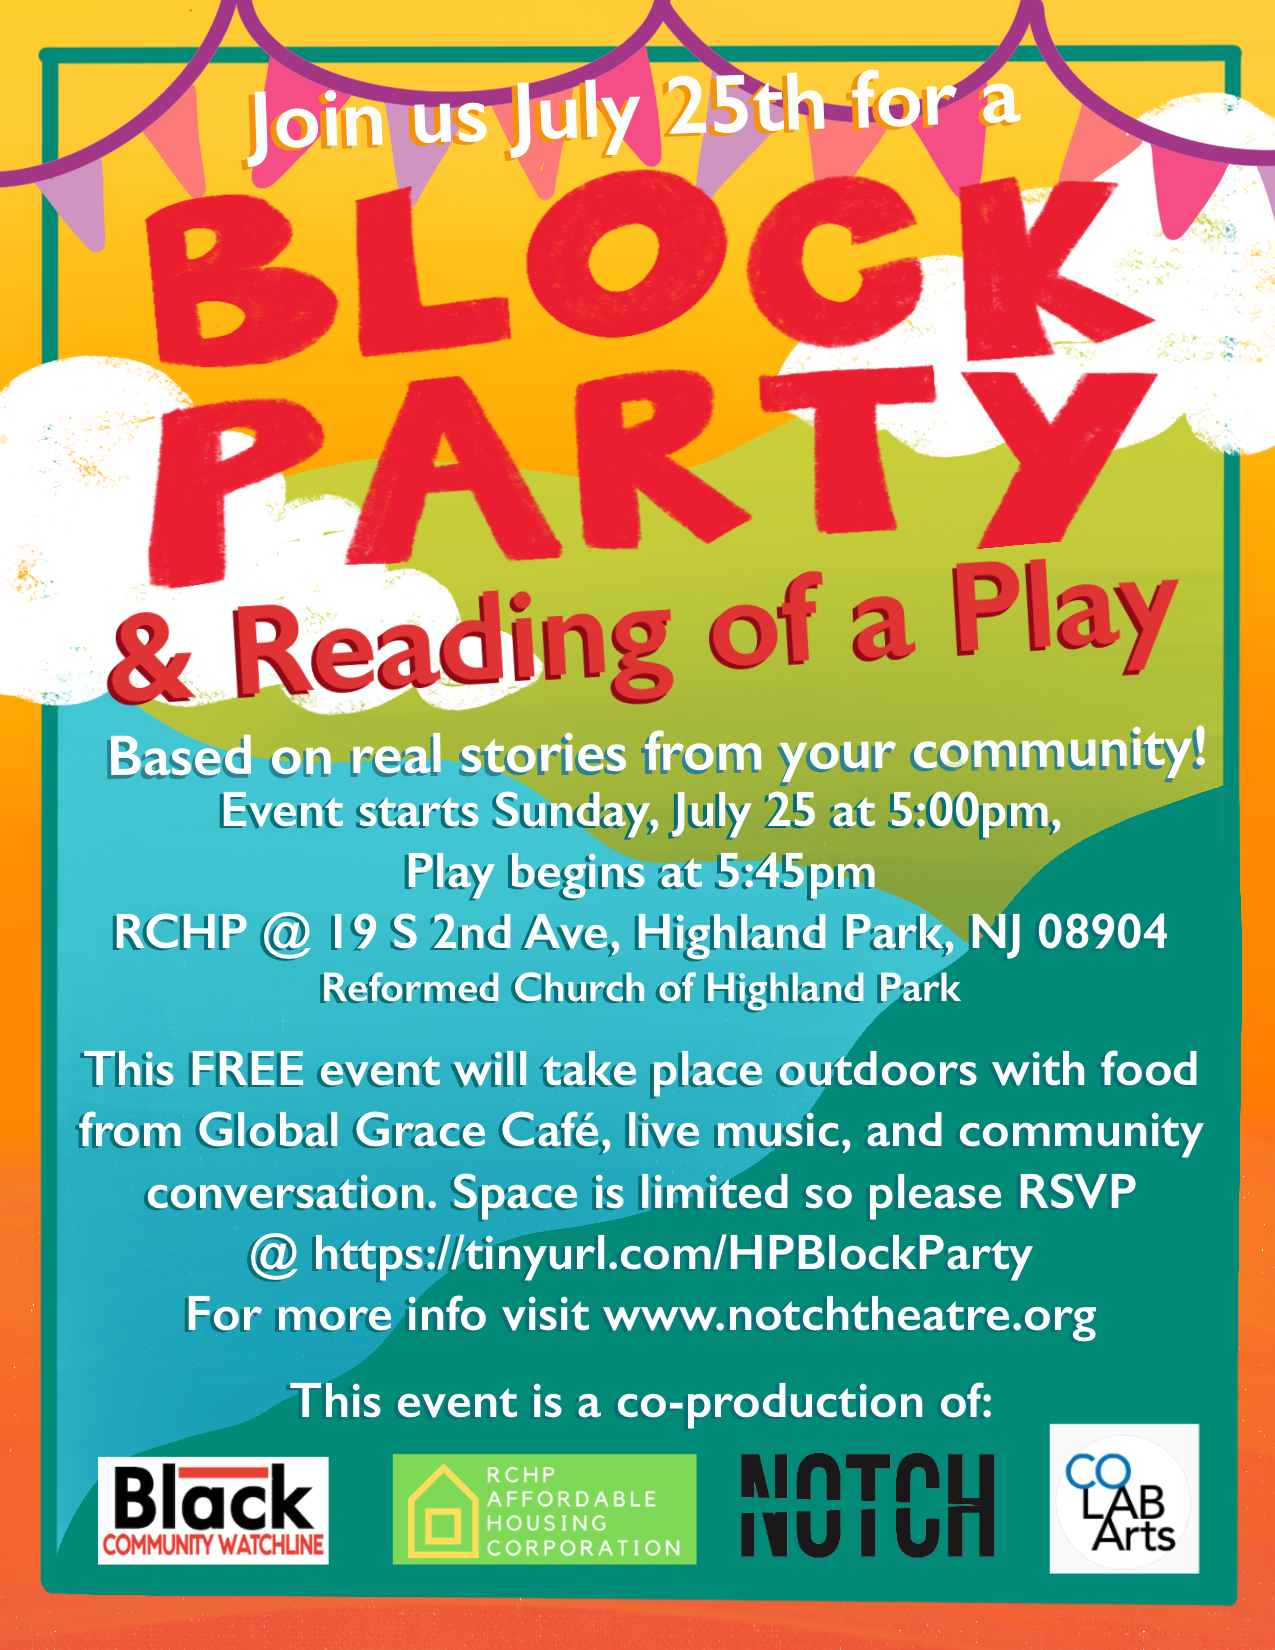 BLOCK PARTY PLAY READING! - June 2021 — coLAB Arts